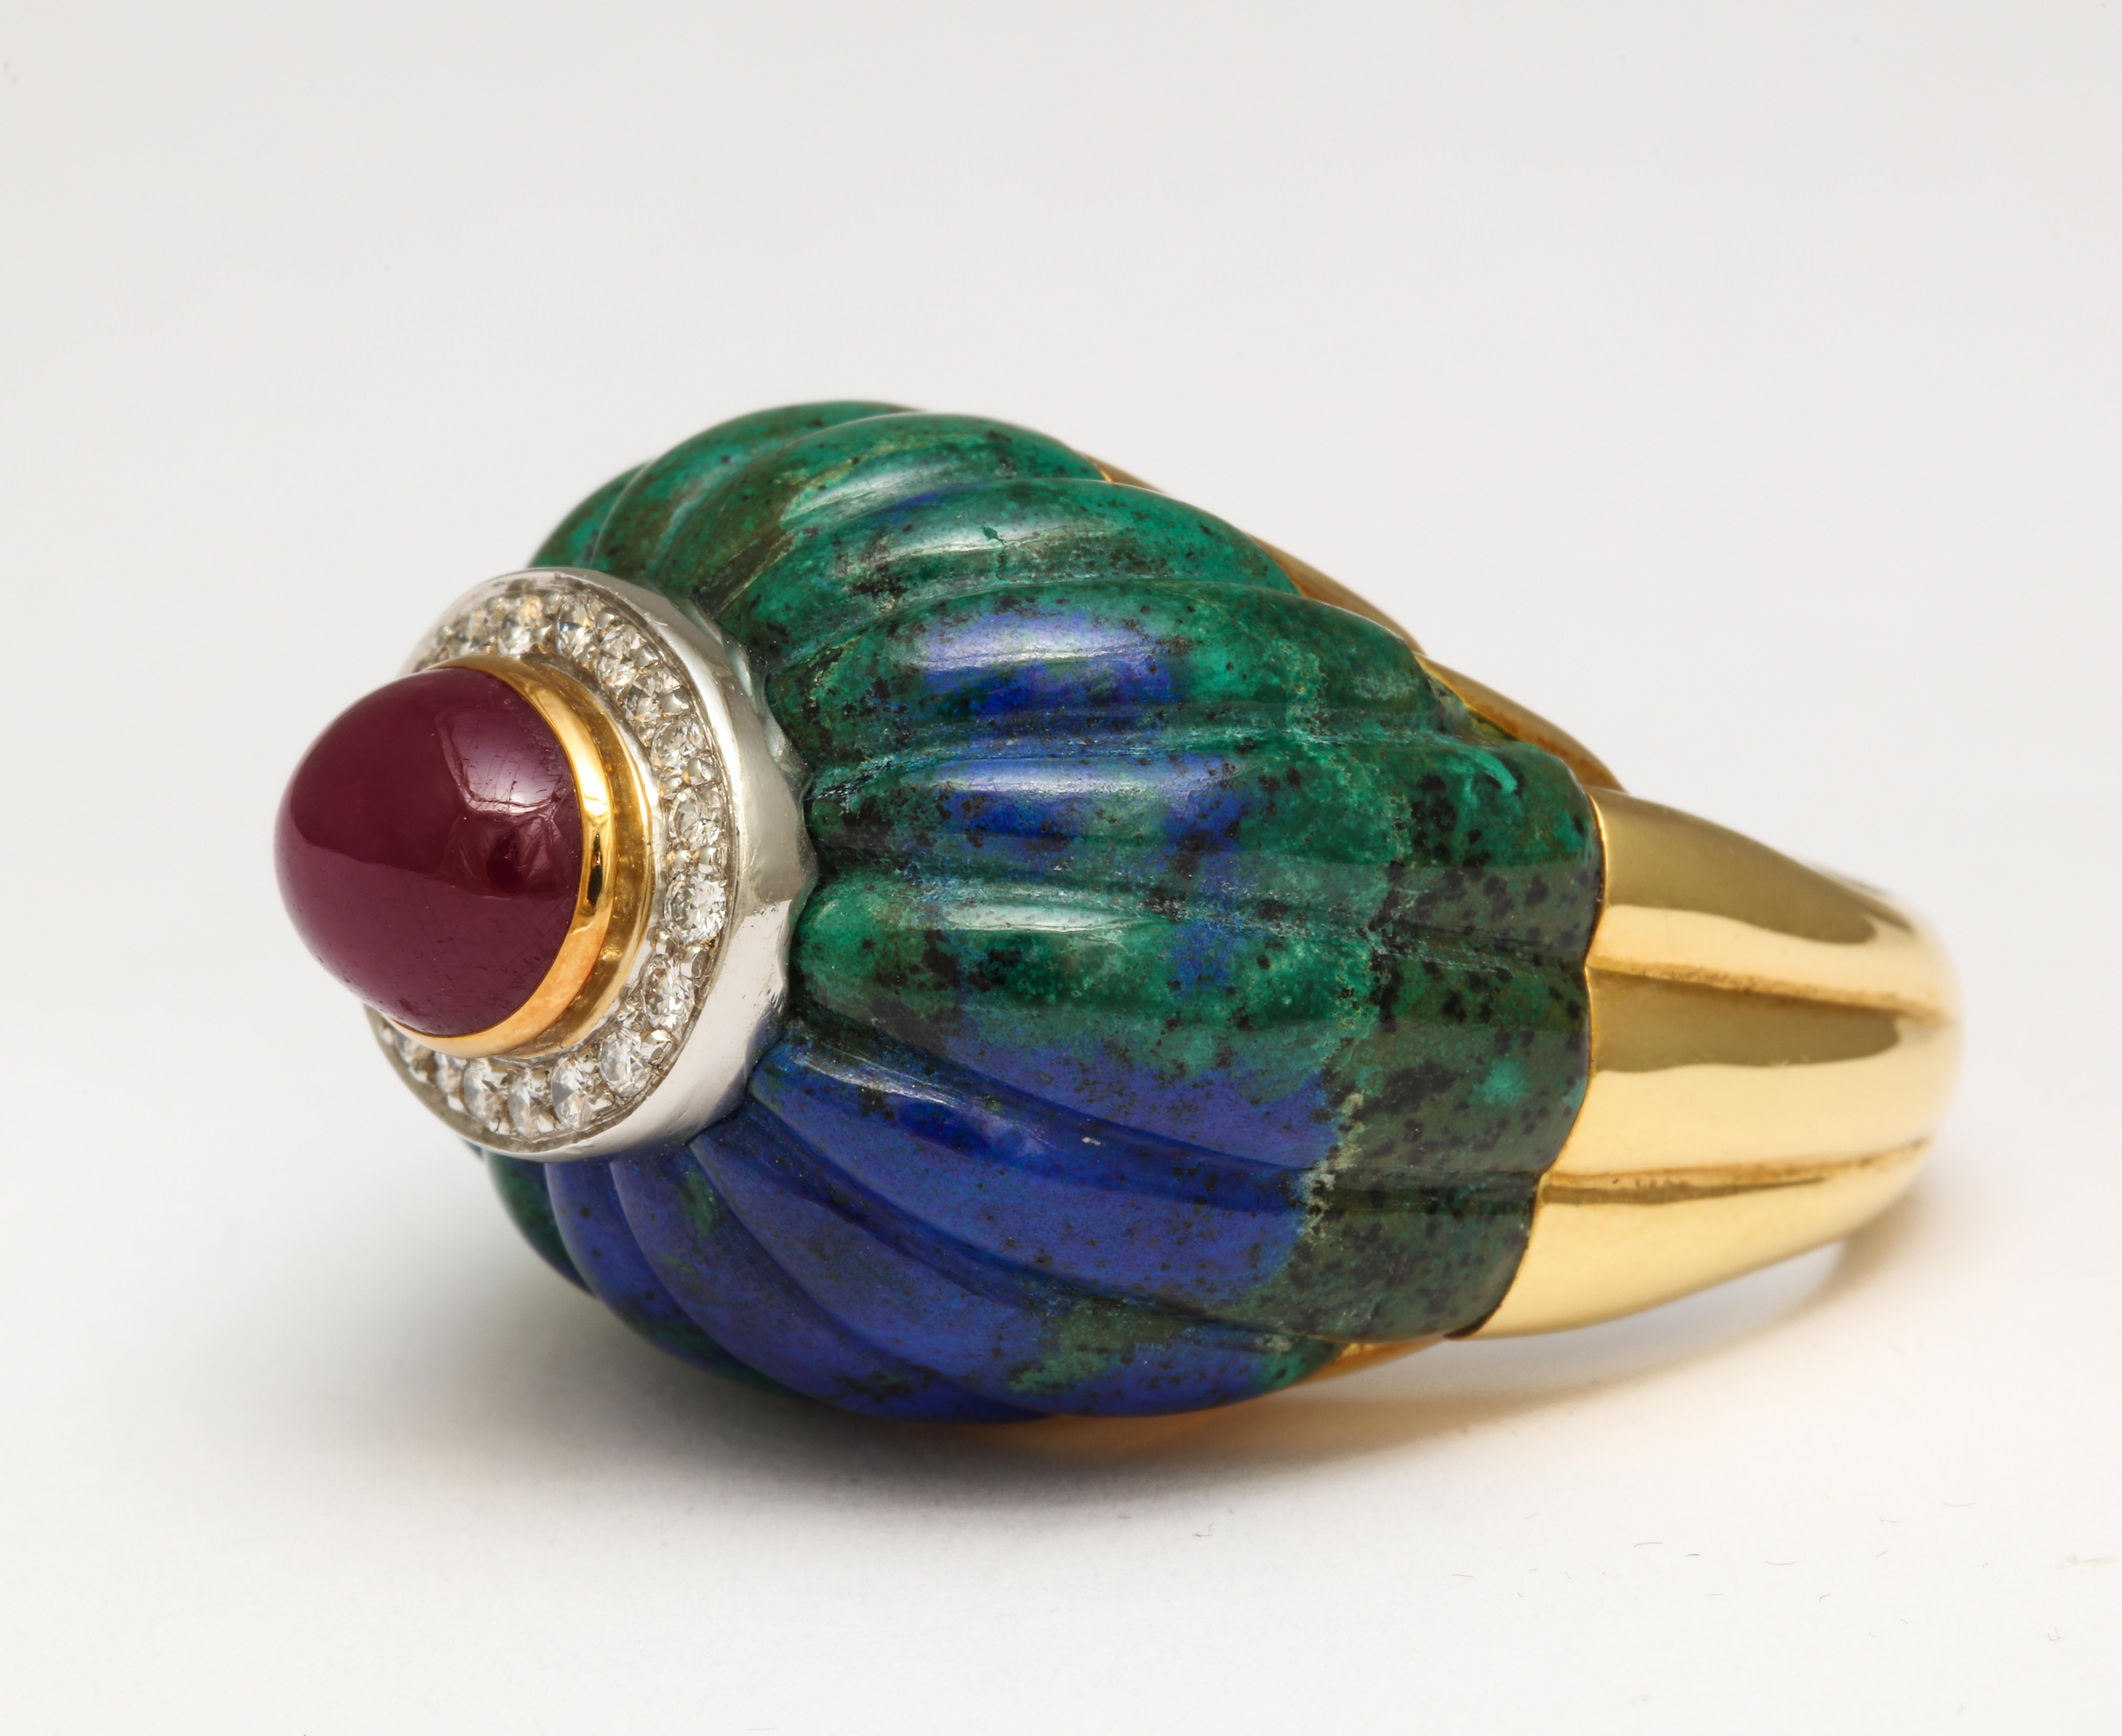 From renown New York jewelry designer David Webb we offer a 1970s 18K gold ring of hand carved azurite-malachite set with a large cabochon ruby over an oval bed of platinum set diamonds. Measured as looking from above: 5/8 inch x 1 1/8 inches, and